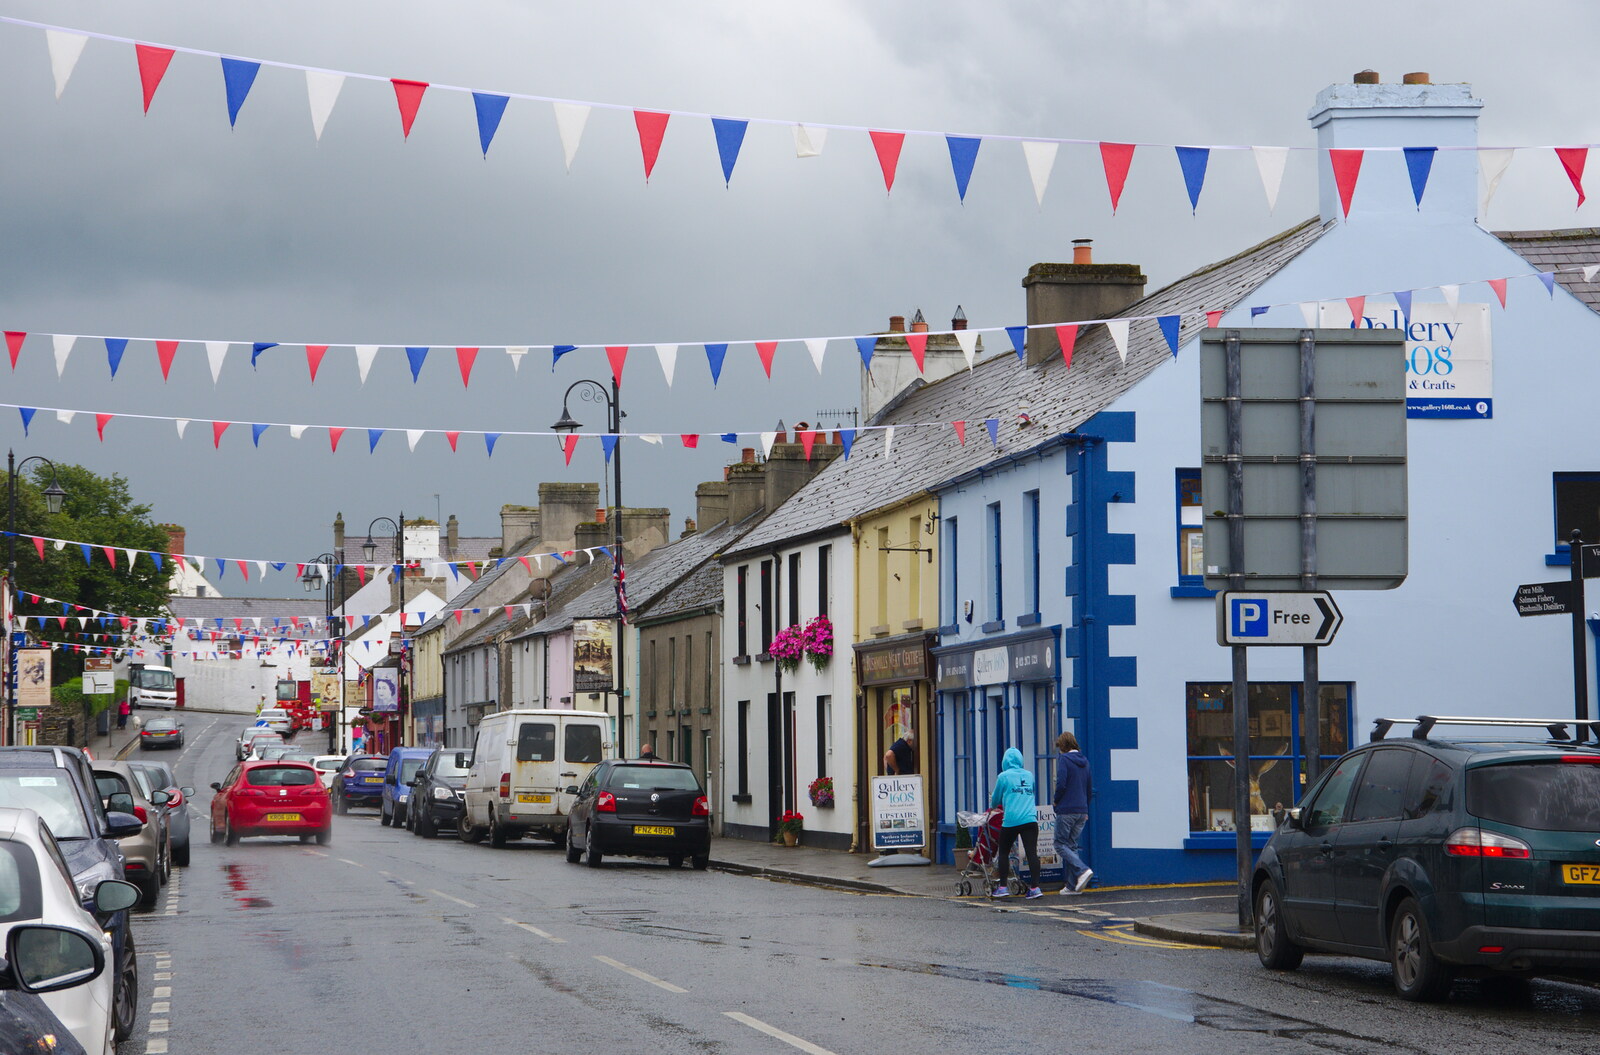 Bushmills High Street from A Day in Derry, County Londonderry, Northern Ireland - 15th August 2019